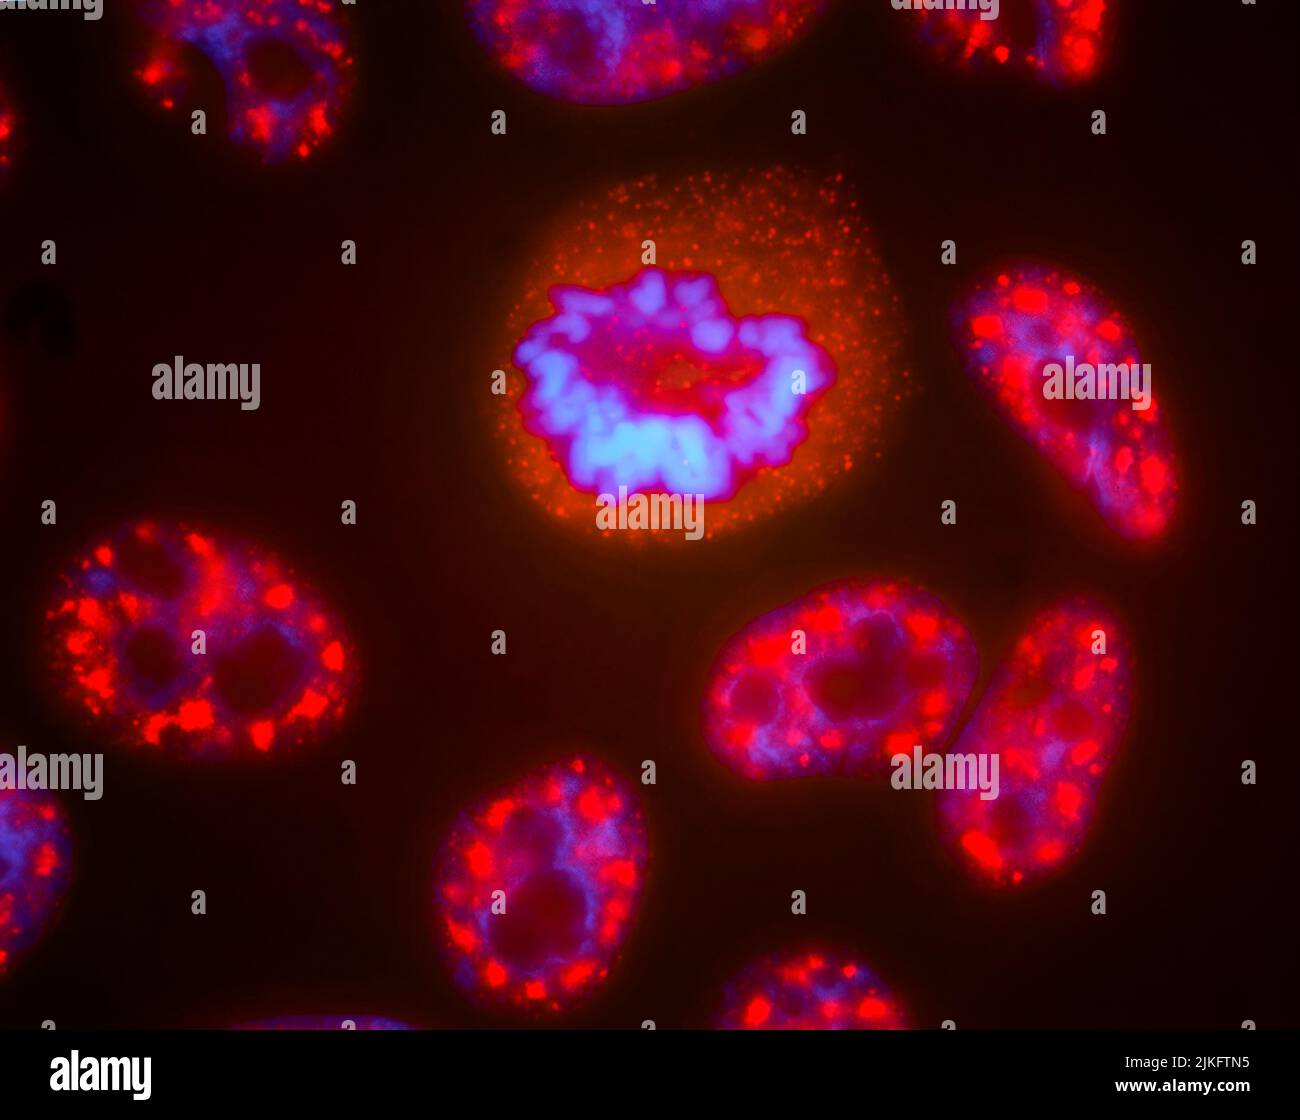 The human cell nucleus contains a large number of distinct compartments that contribute to the function of a cell, such as speckles that contain RNA processing proteins (red), which lie next to chromosomes (blue ). These speckles disassemble and reassemble during cell division (central cell). Stock Photo